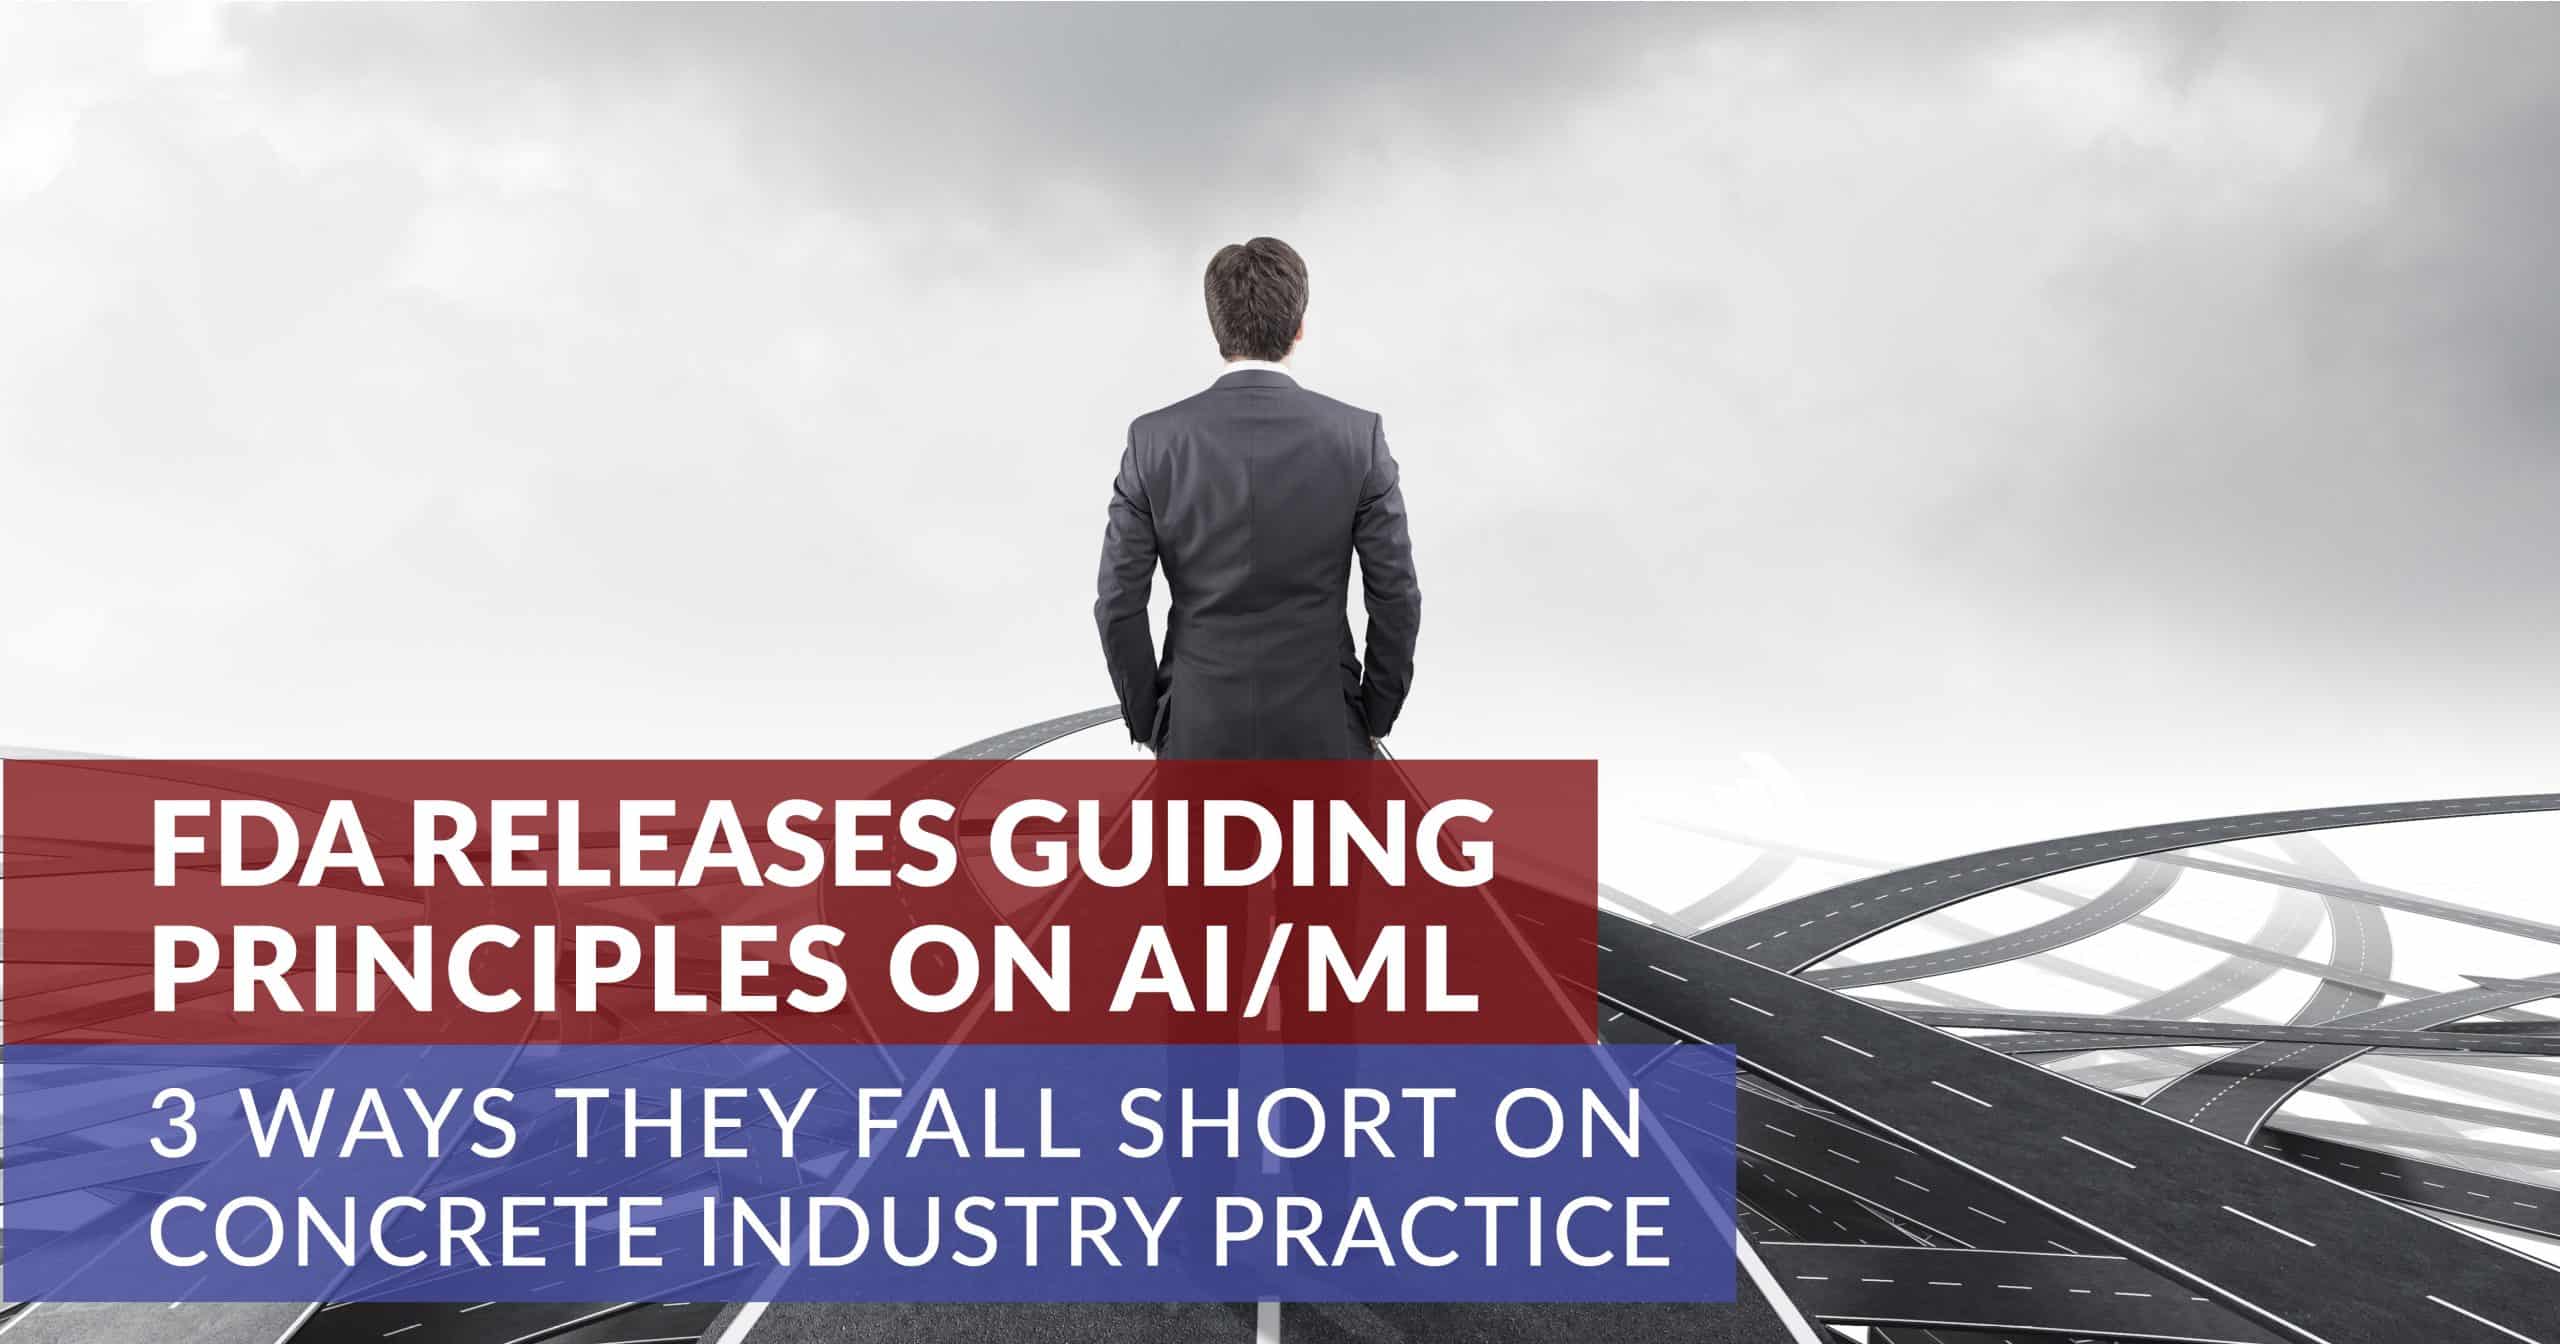 3 Ways the FDA’s “Guiding Principles” for AI/ML Falls Short on Concrete Industry Practices